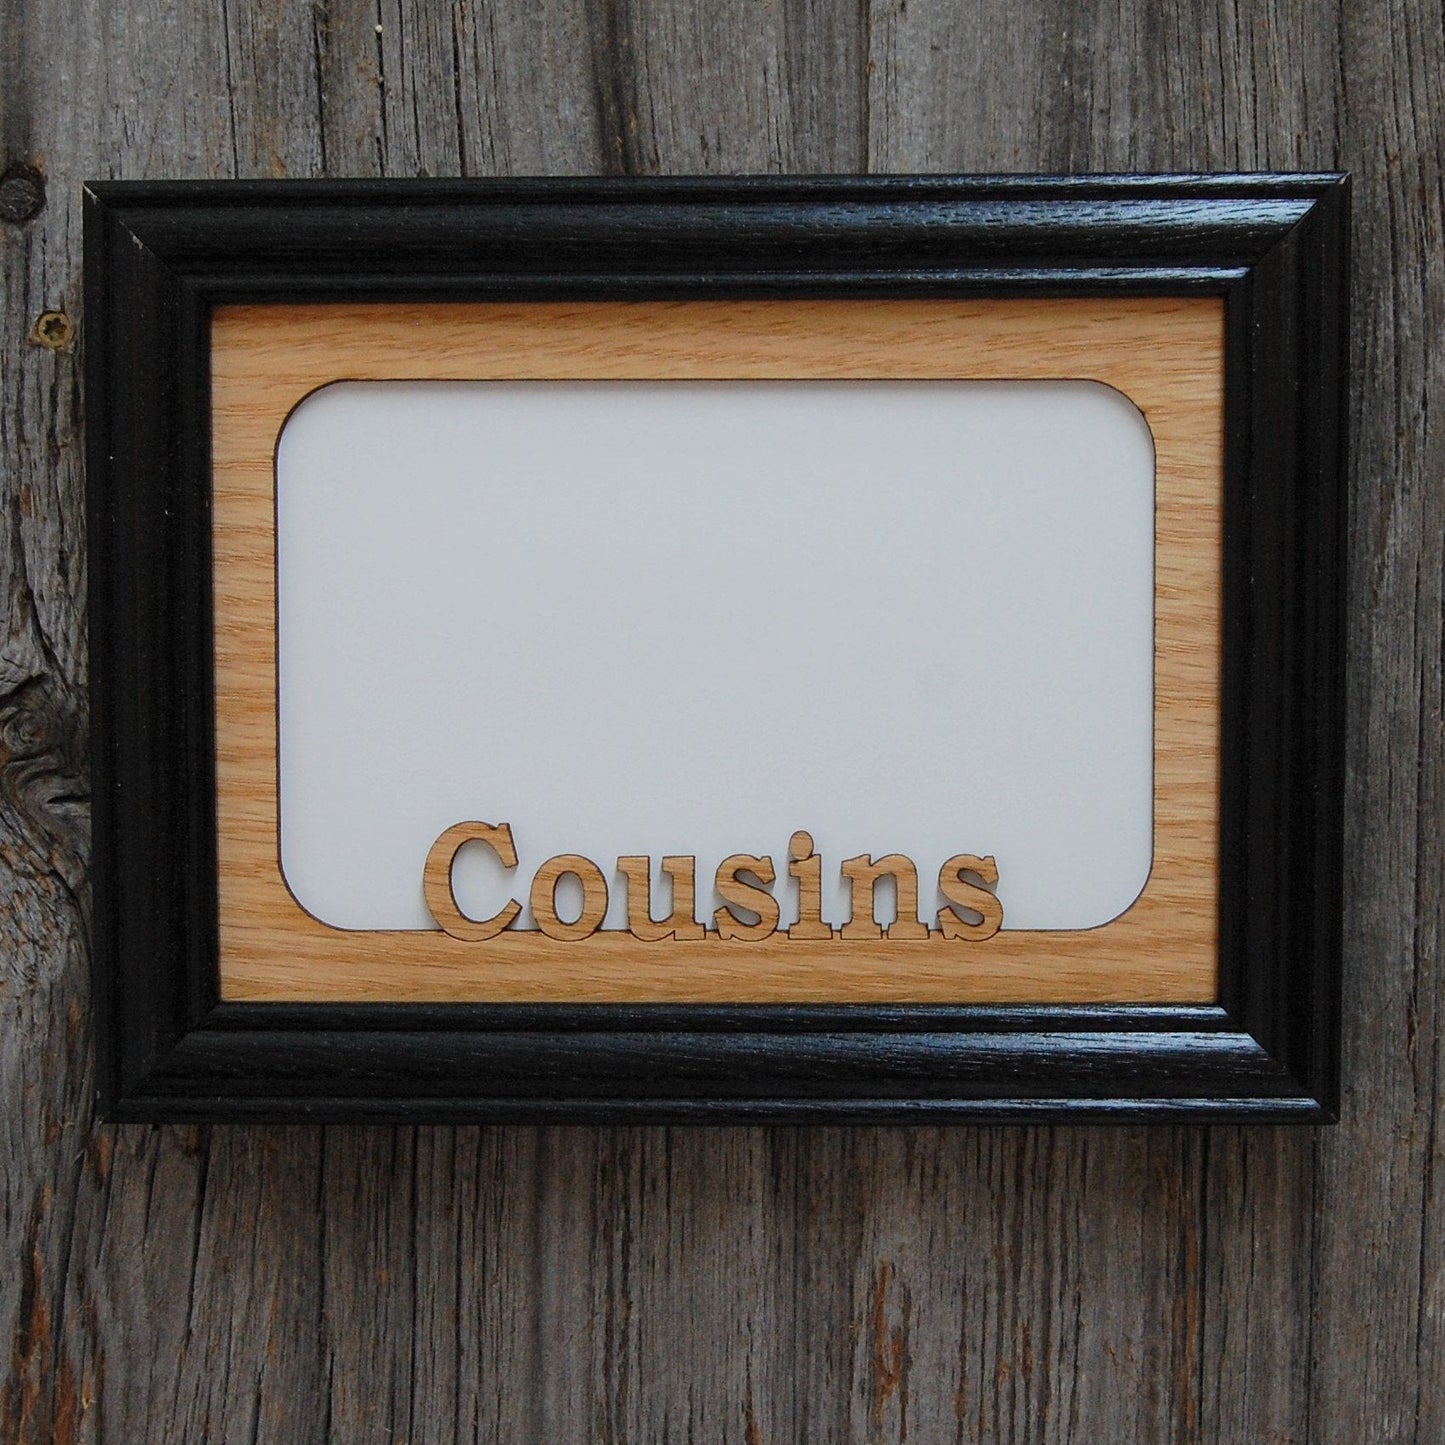 Cousins Picture Frame - 5x7 Frame Holds 4x6 Photo - Cousins Picture Frame - 5x7 Frame Holds 4x6 Photo - 5x7 Cousins Picture Frame, Picture Frame, home decor, laser engraved - Legacy Images - Legacy Images - Picture Frames - Legacy Images - Picture Frames